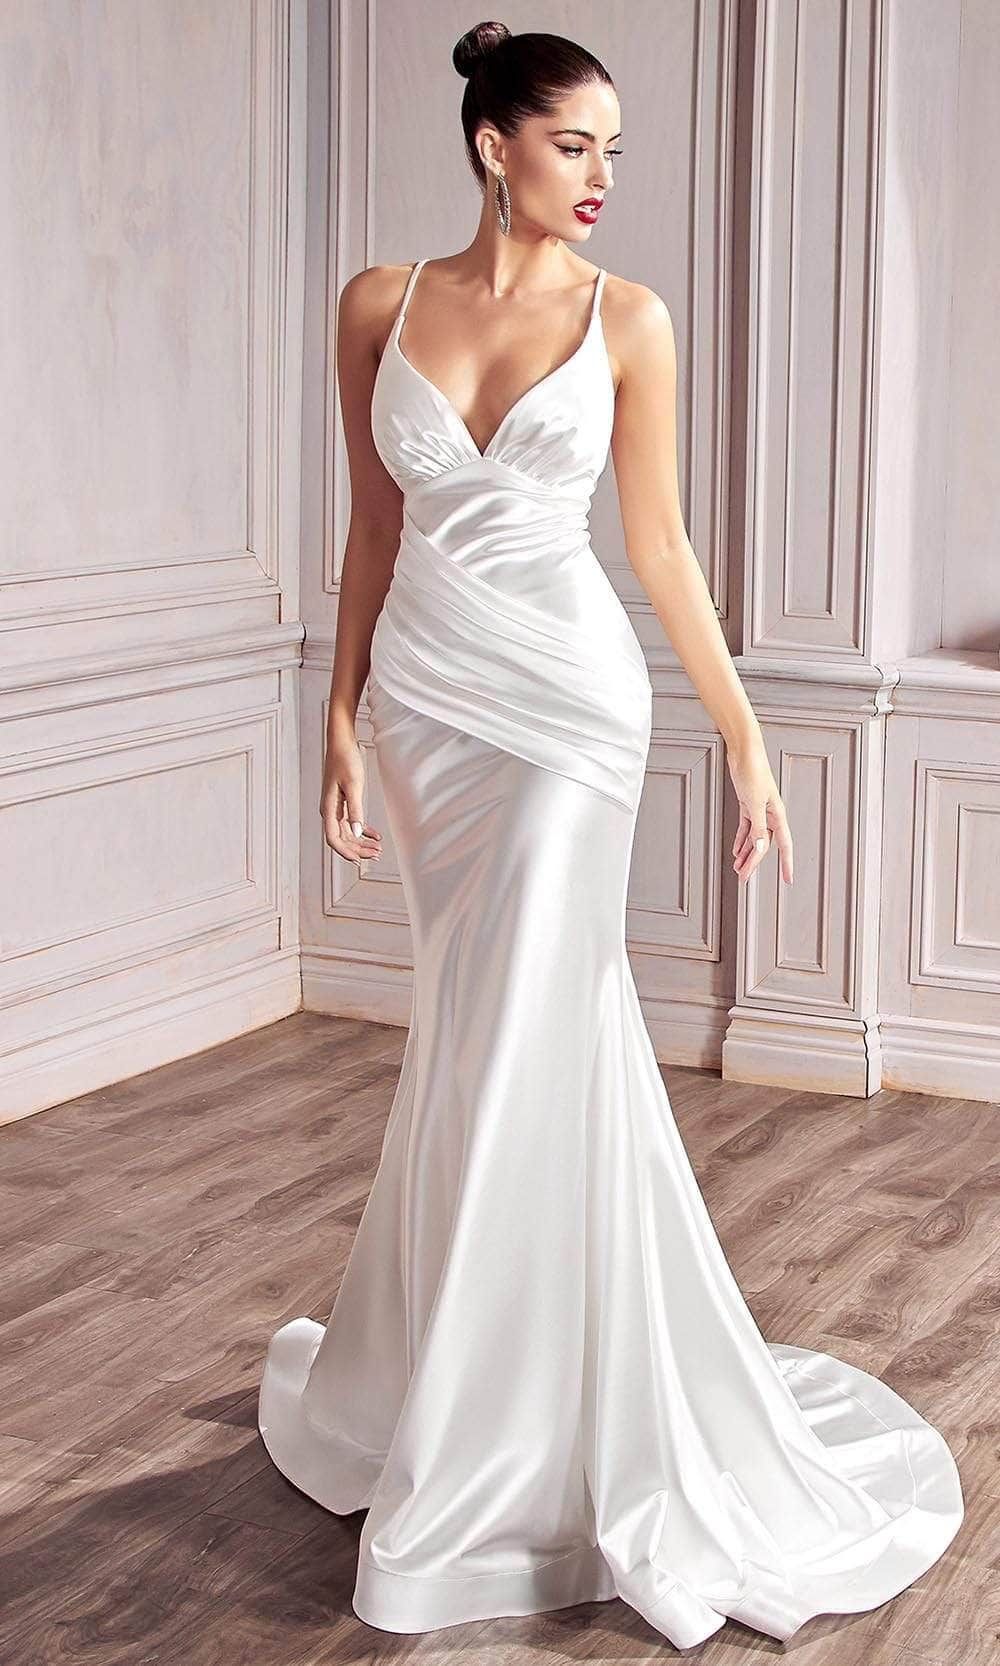 Image of Ladivine Bridals - CH236W Open Back V Neck Mermaid Bridal Gown